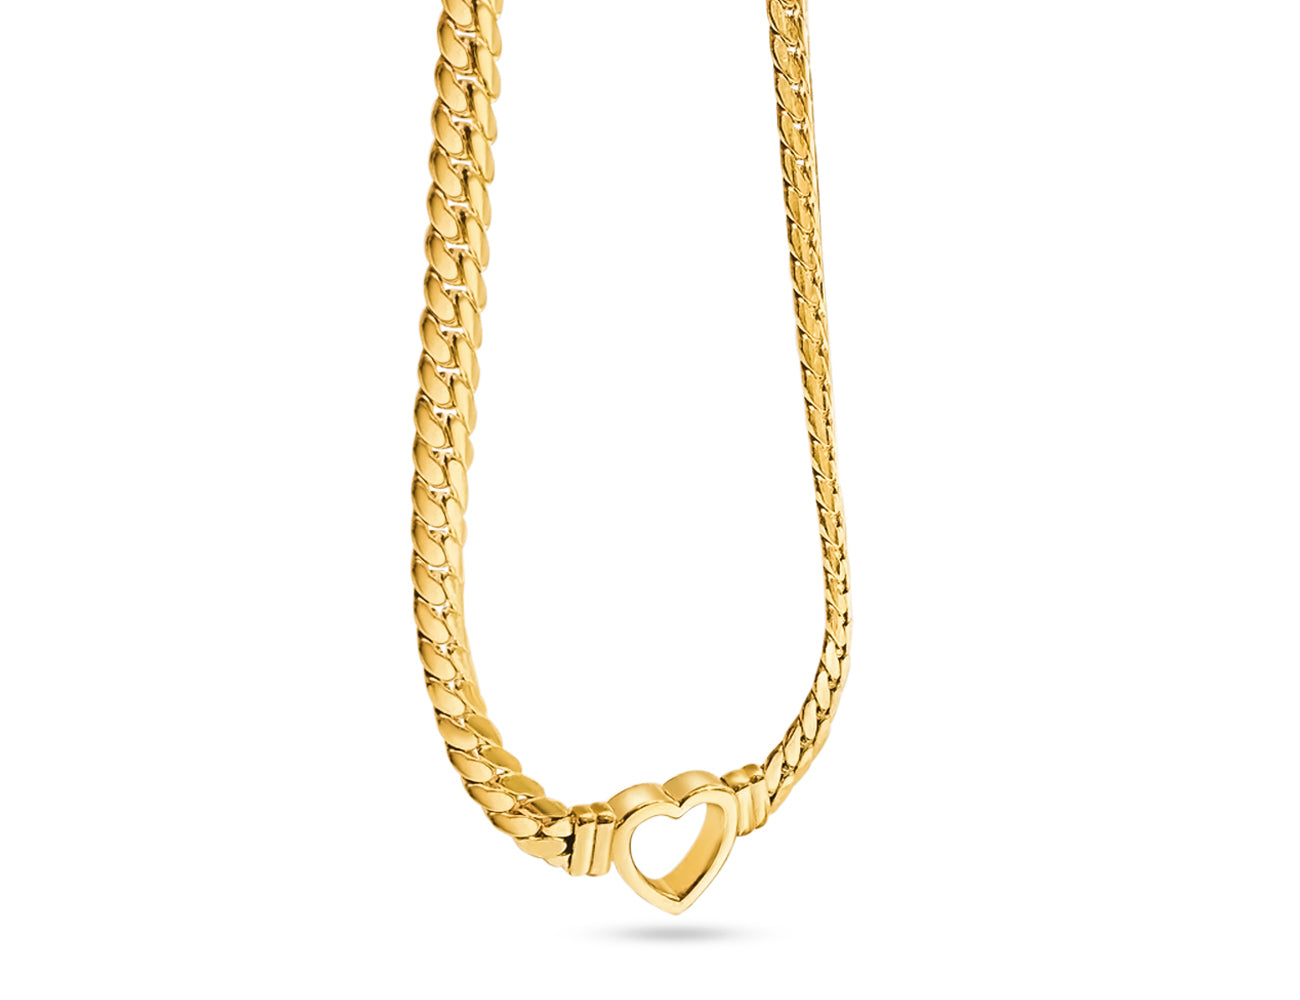 FAX Jewelry | 'Solid Love' Heart Chain Necklace | 18 karat gold plated stainless steel